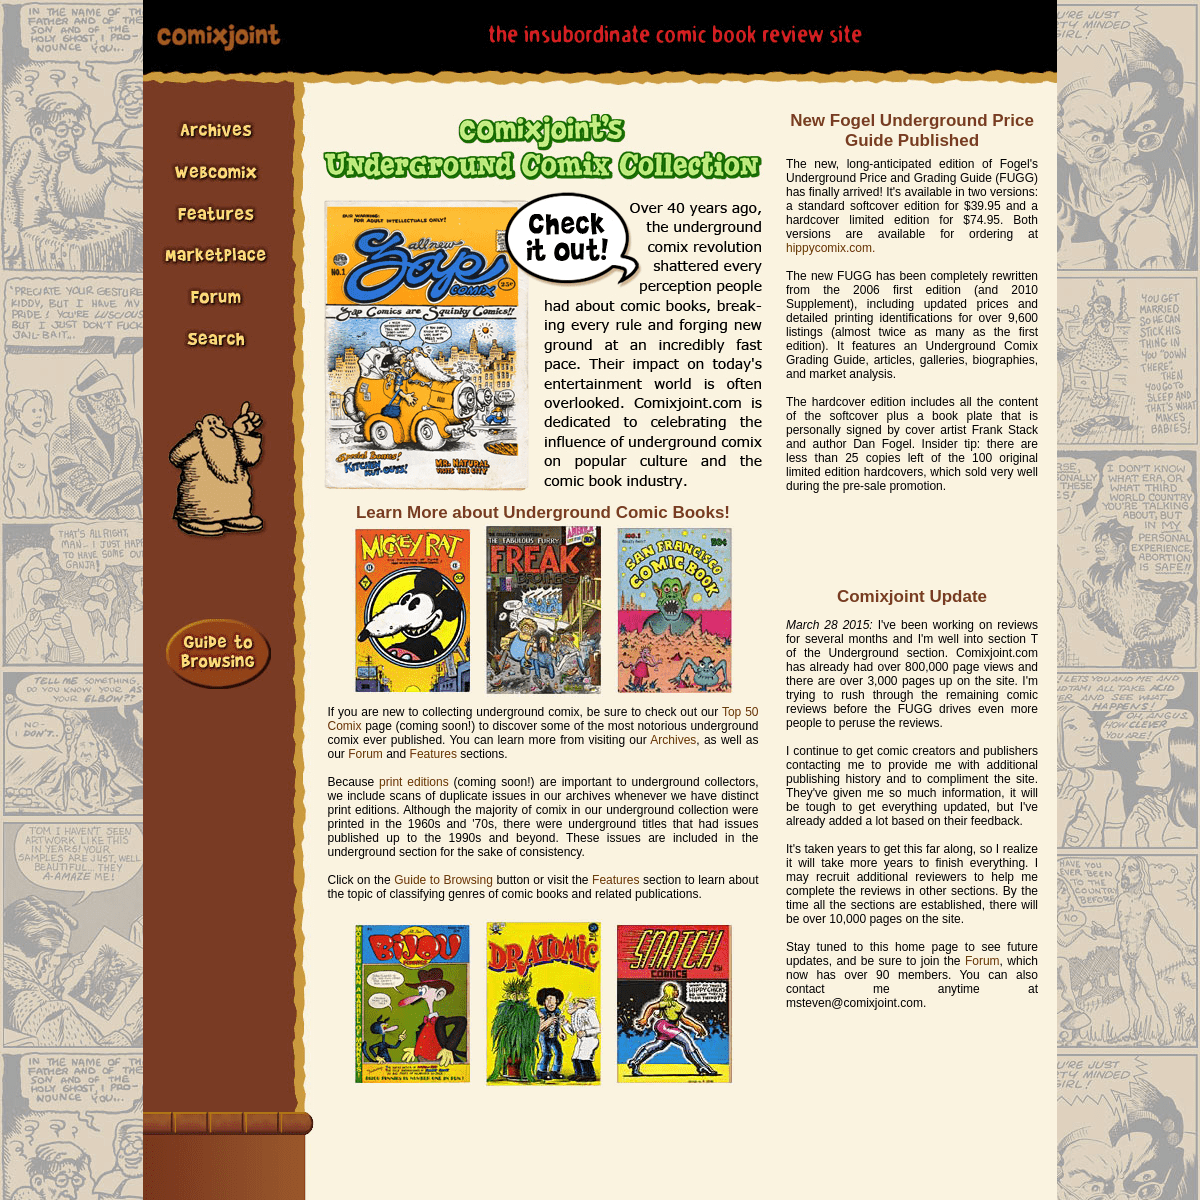 A complete backup of comixjoint.com